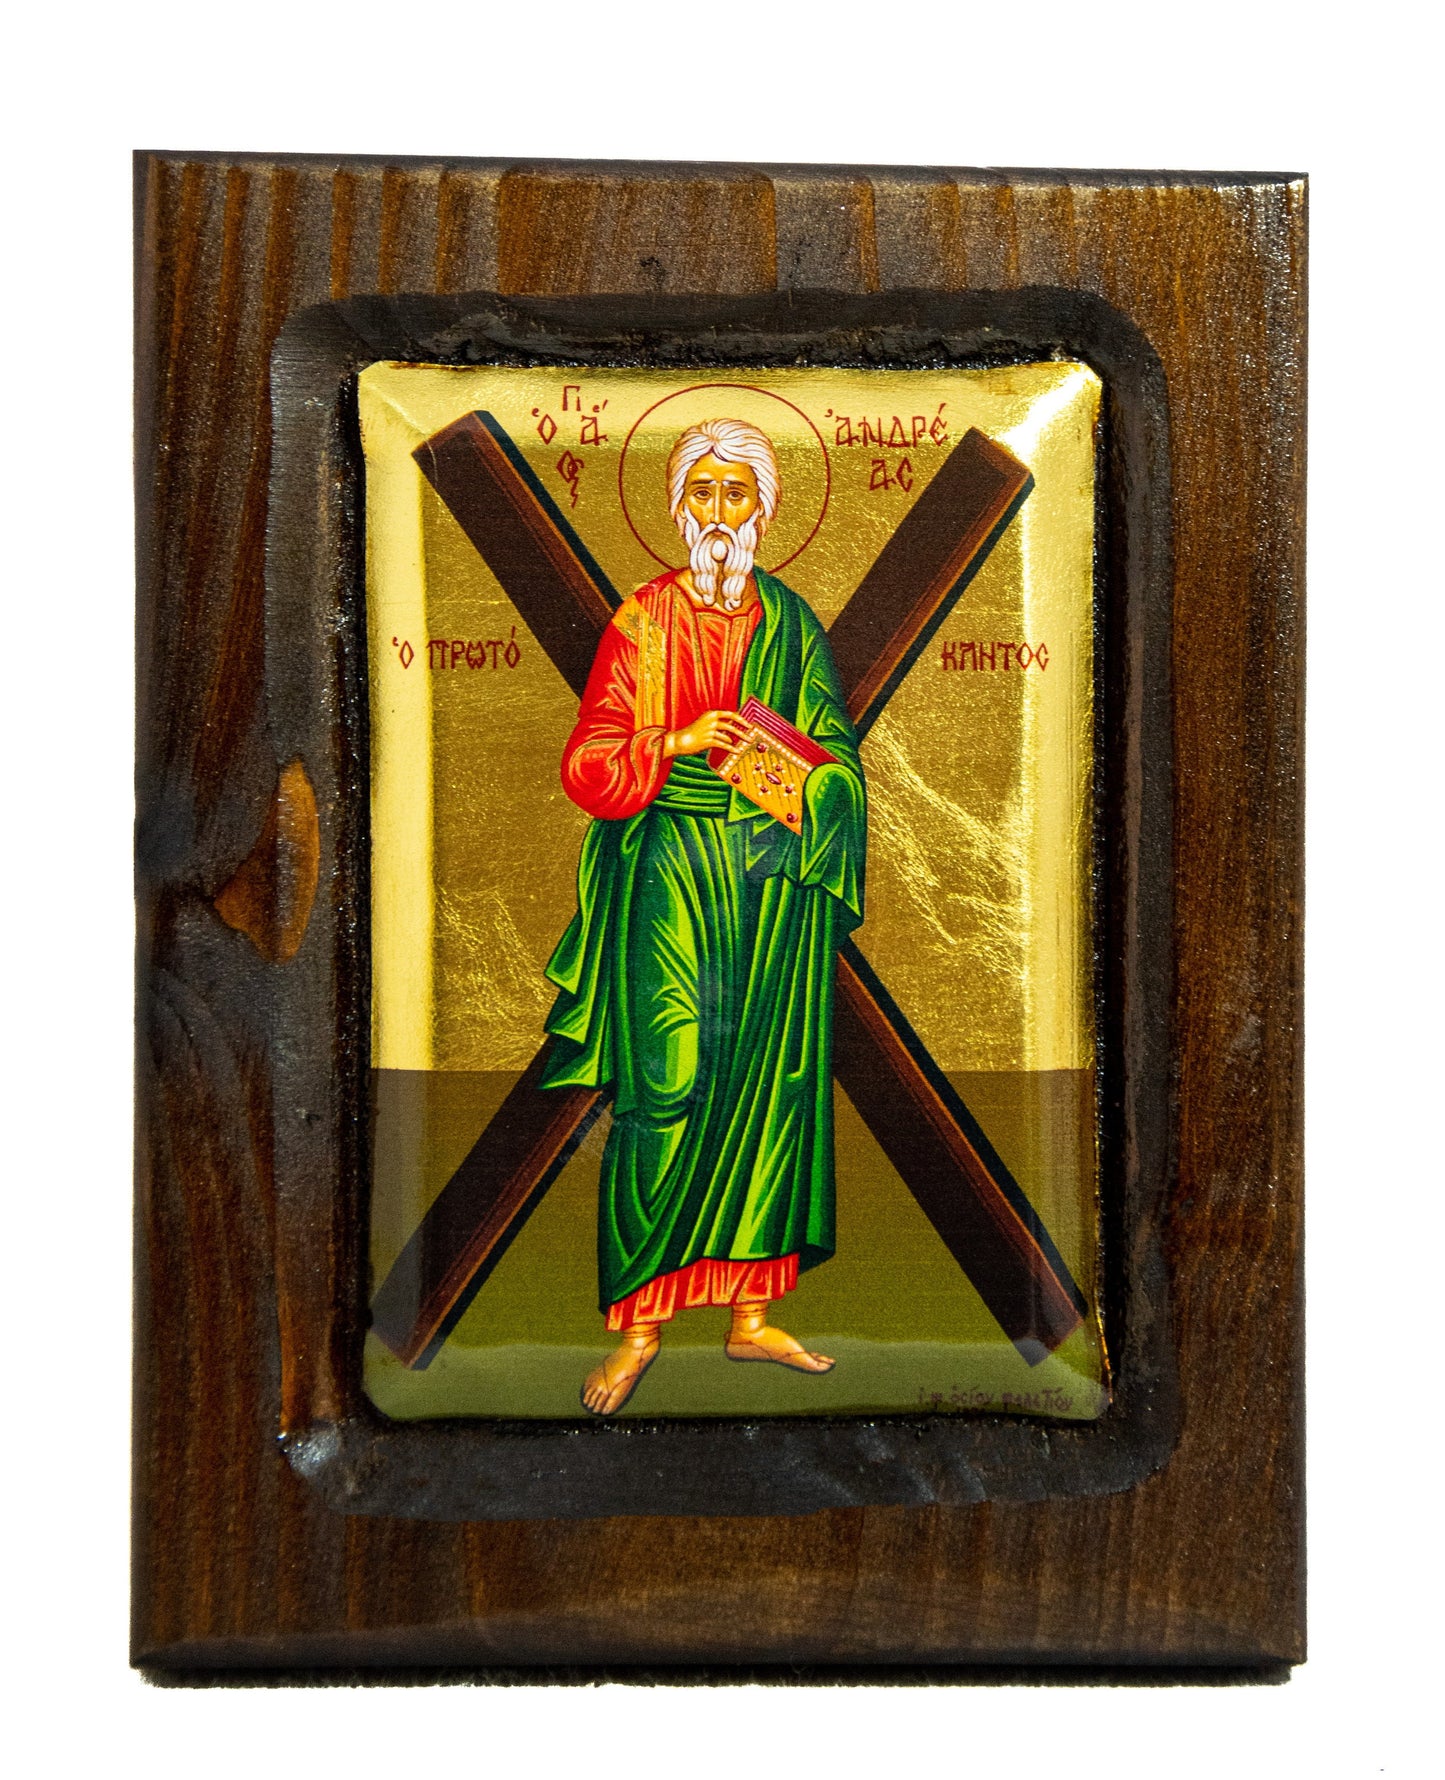 Saint Andrew icon the Apostle, Handmade Greek Orthodox icon of St Andrew, Byzantine art wall hanging wood plaque w/ gold leaf religious gift TheHolyArt